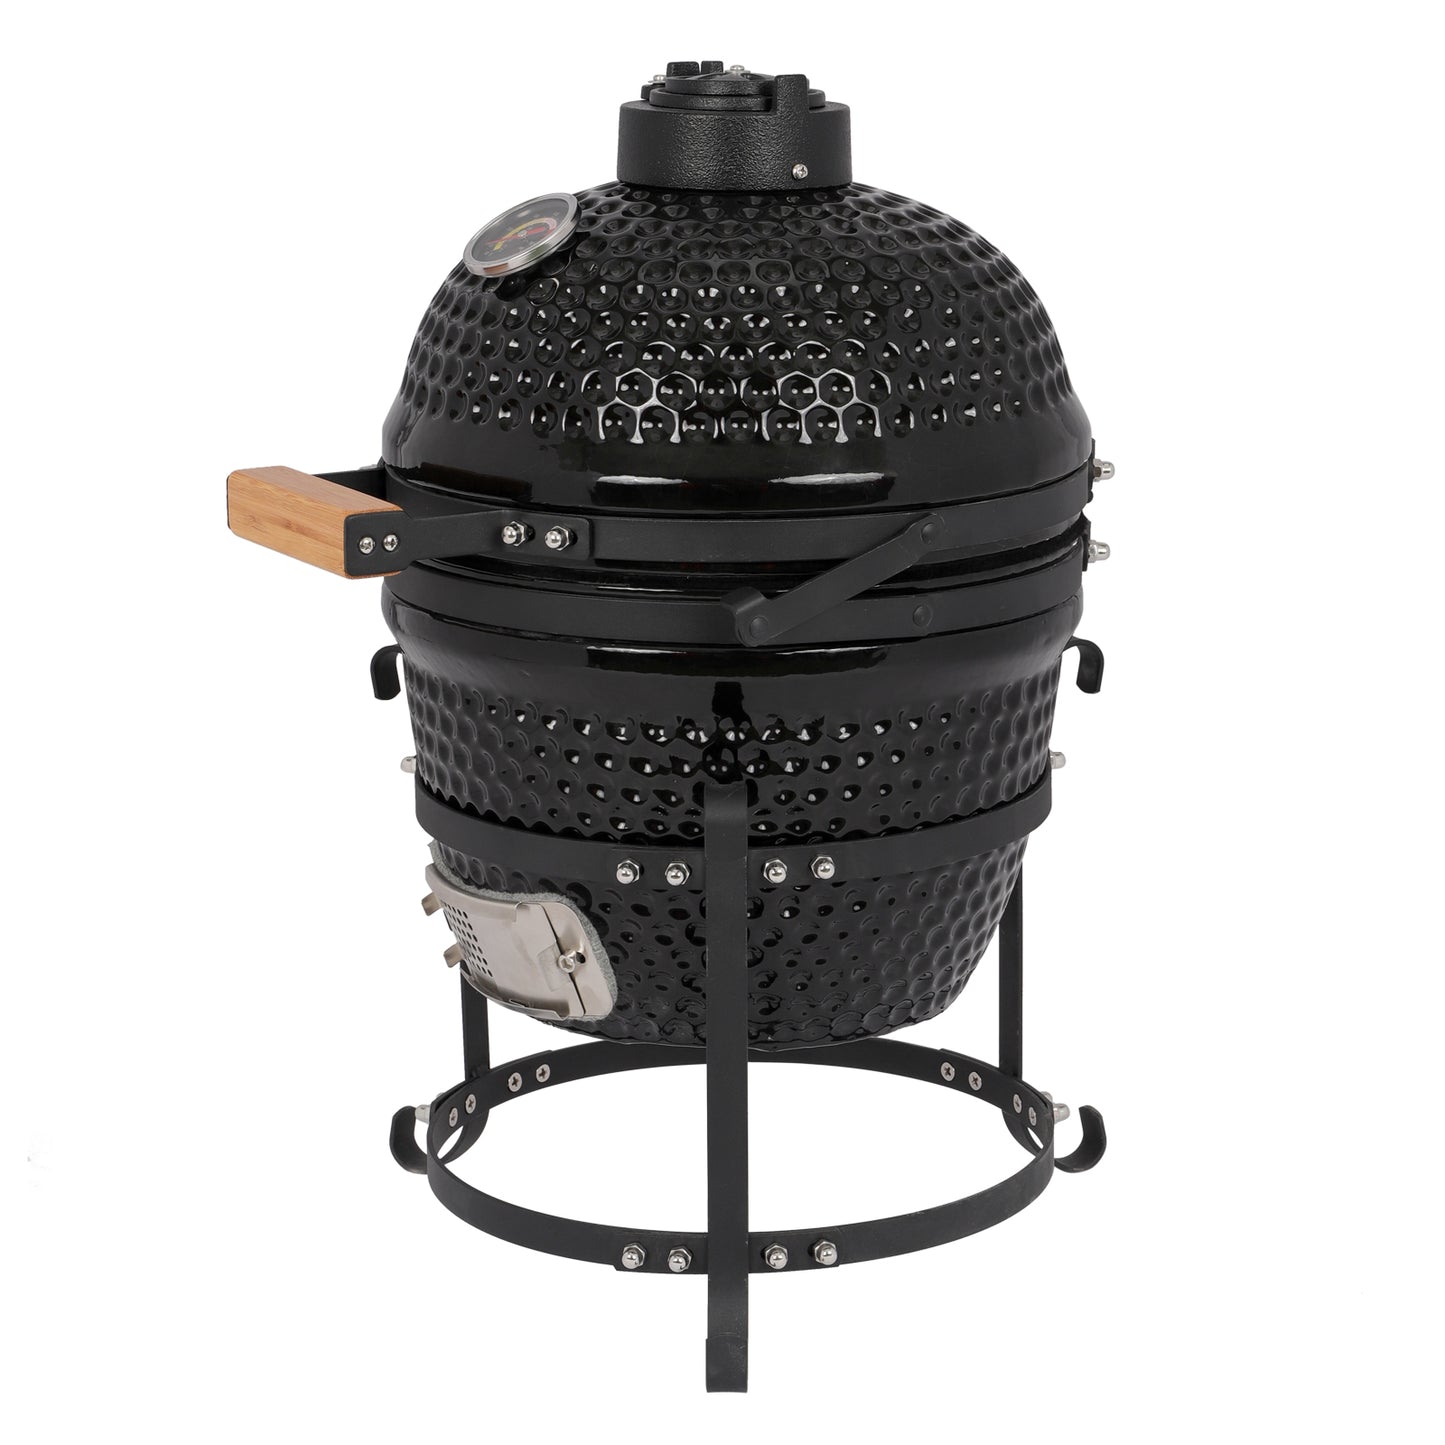 Kamado Style Egg Shaped 13in Round Ceramic Charcoal Grill - BLACK